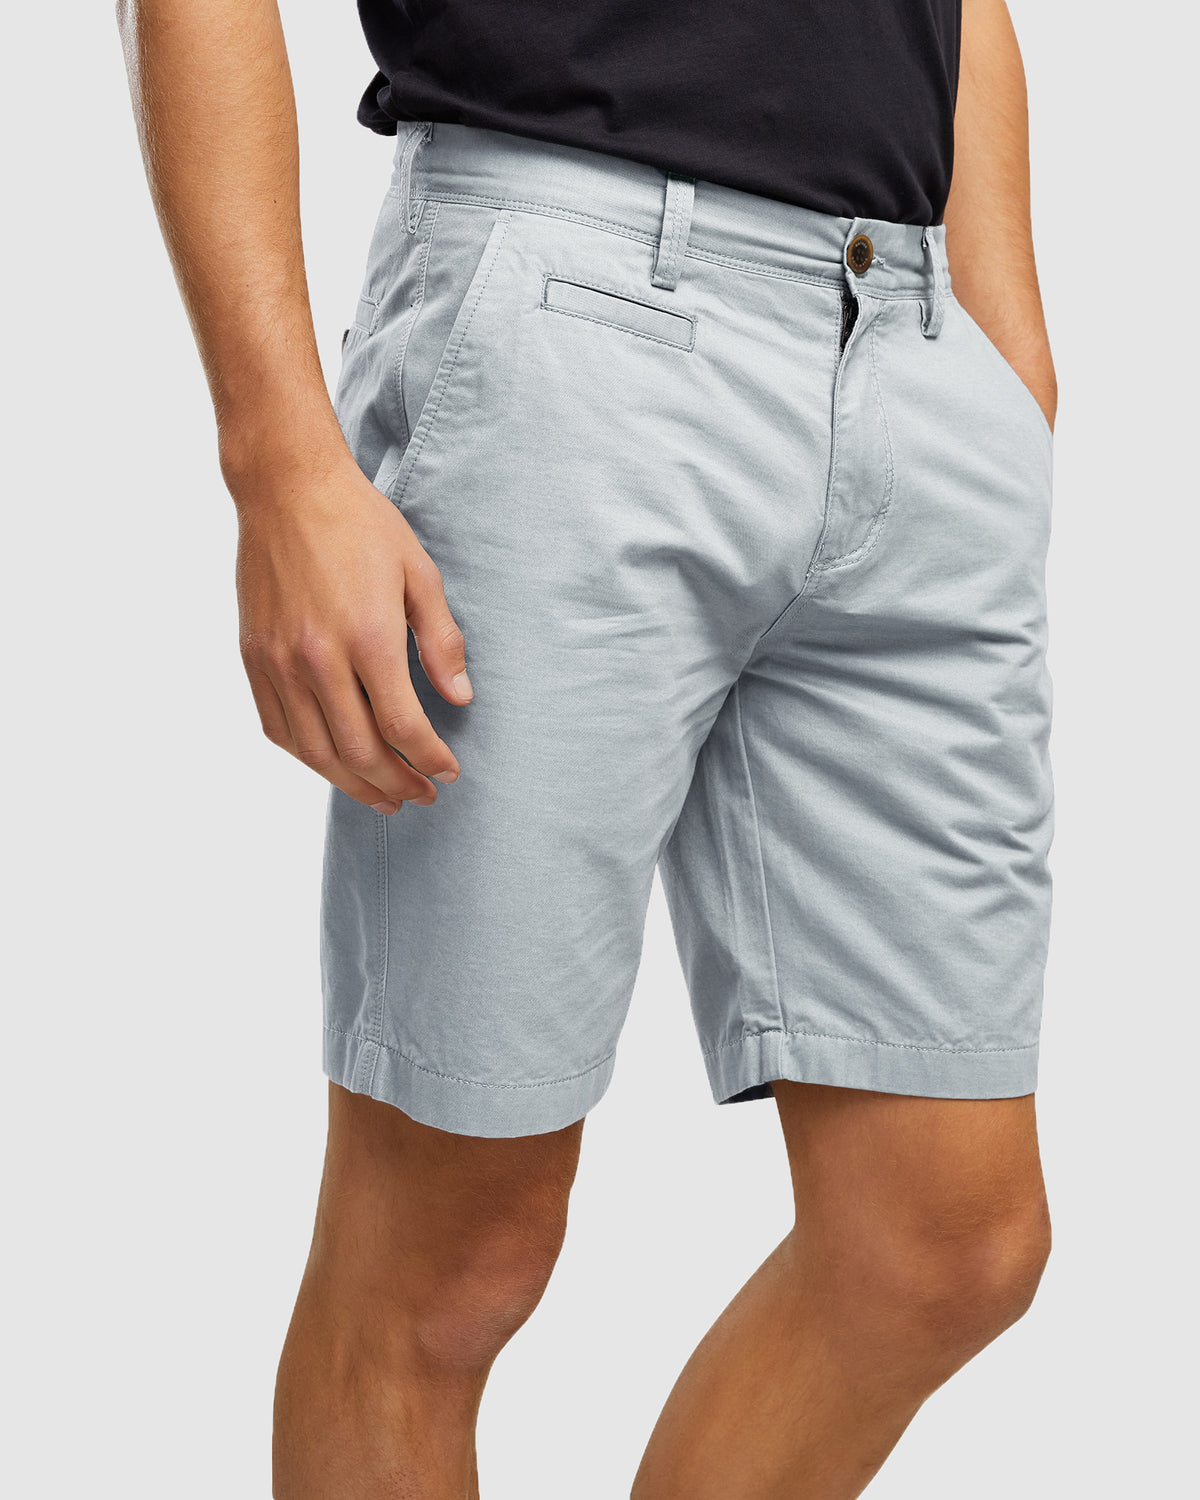 Glacier Performance Shorts with Pockets for Men